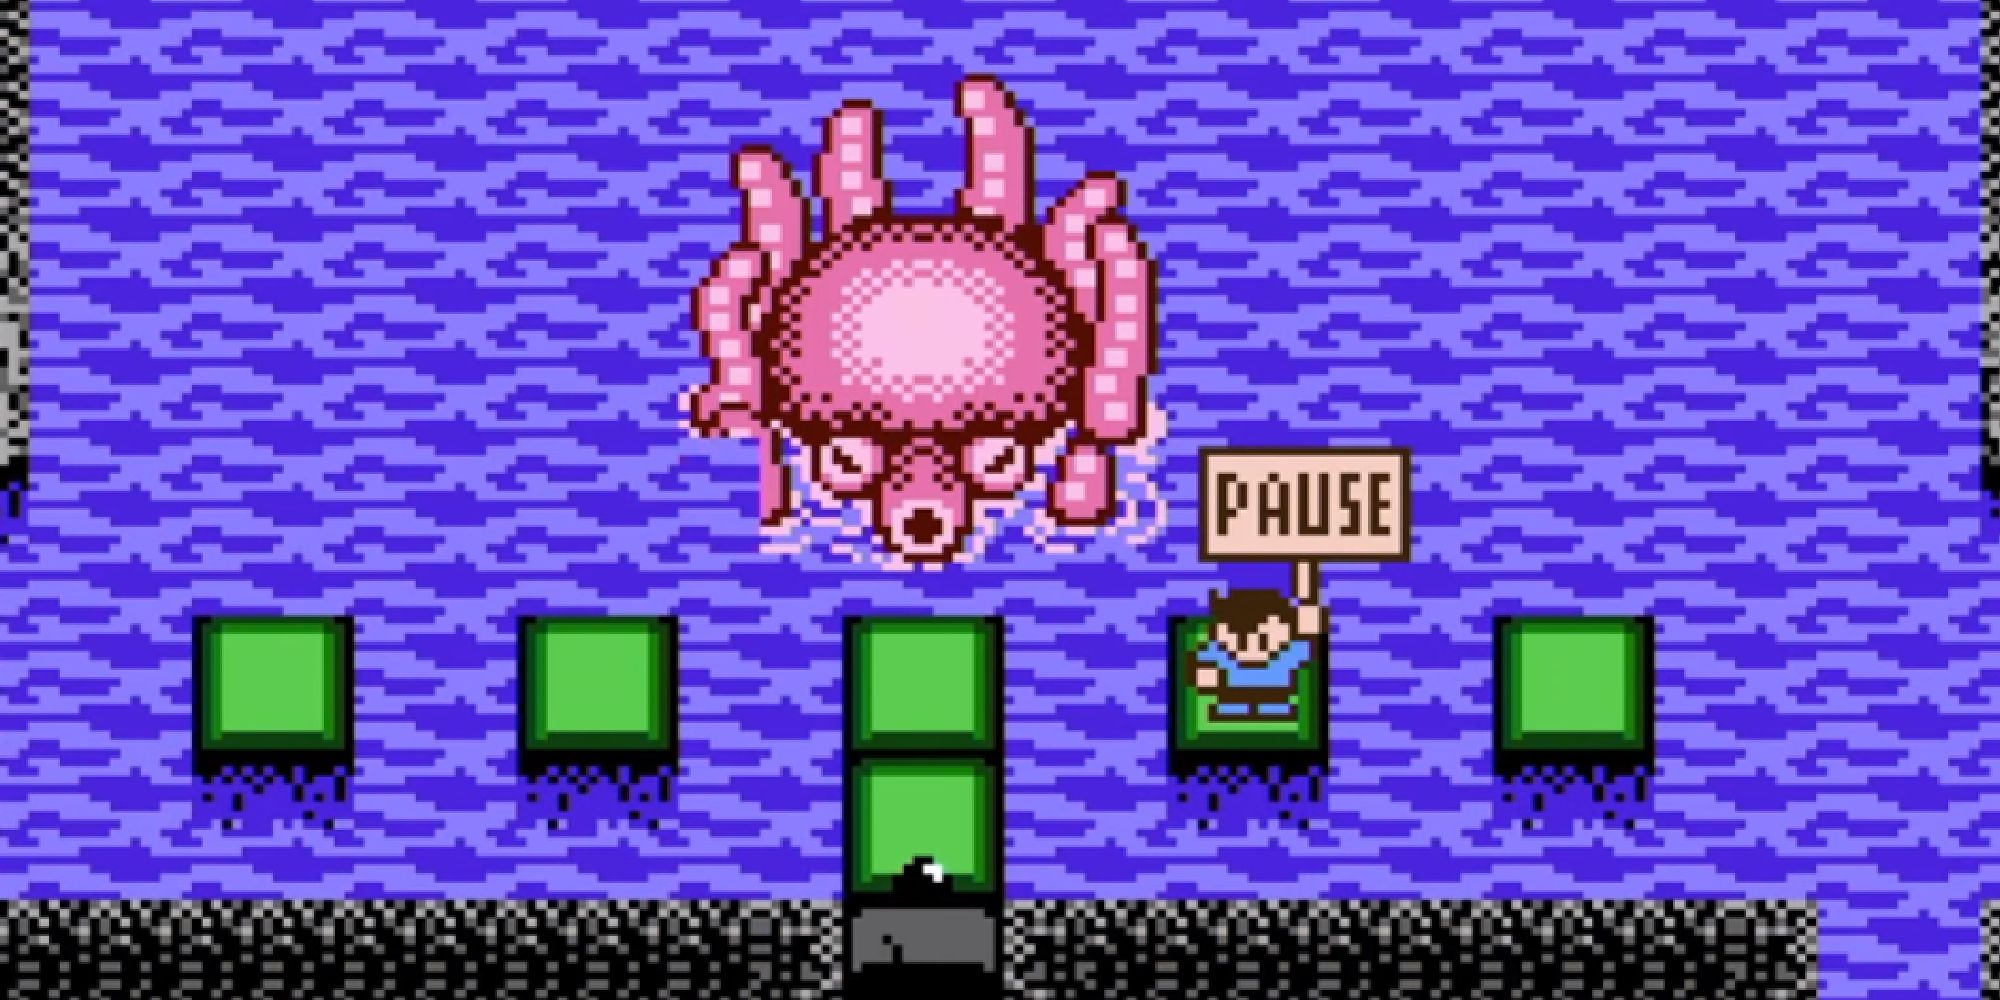 Mike Jones holding a pause sign in StarTropics